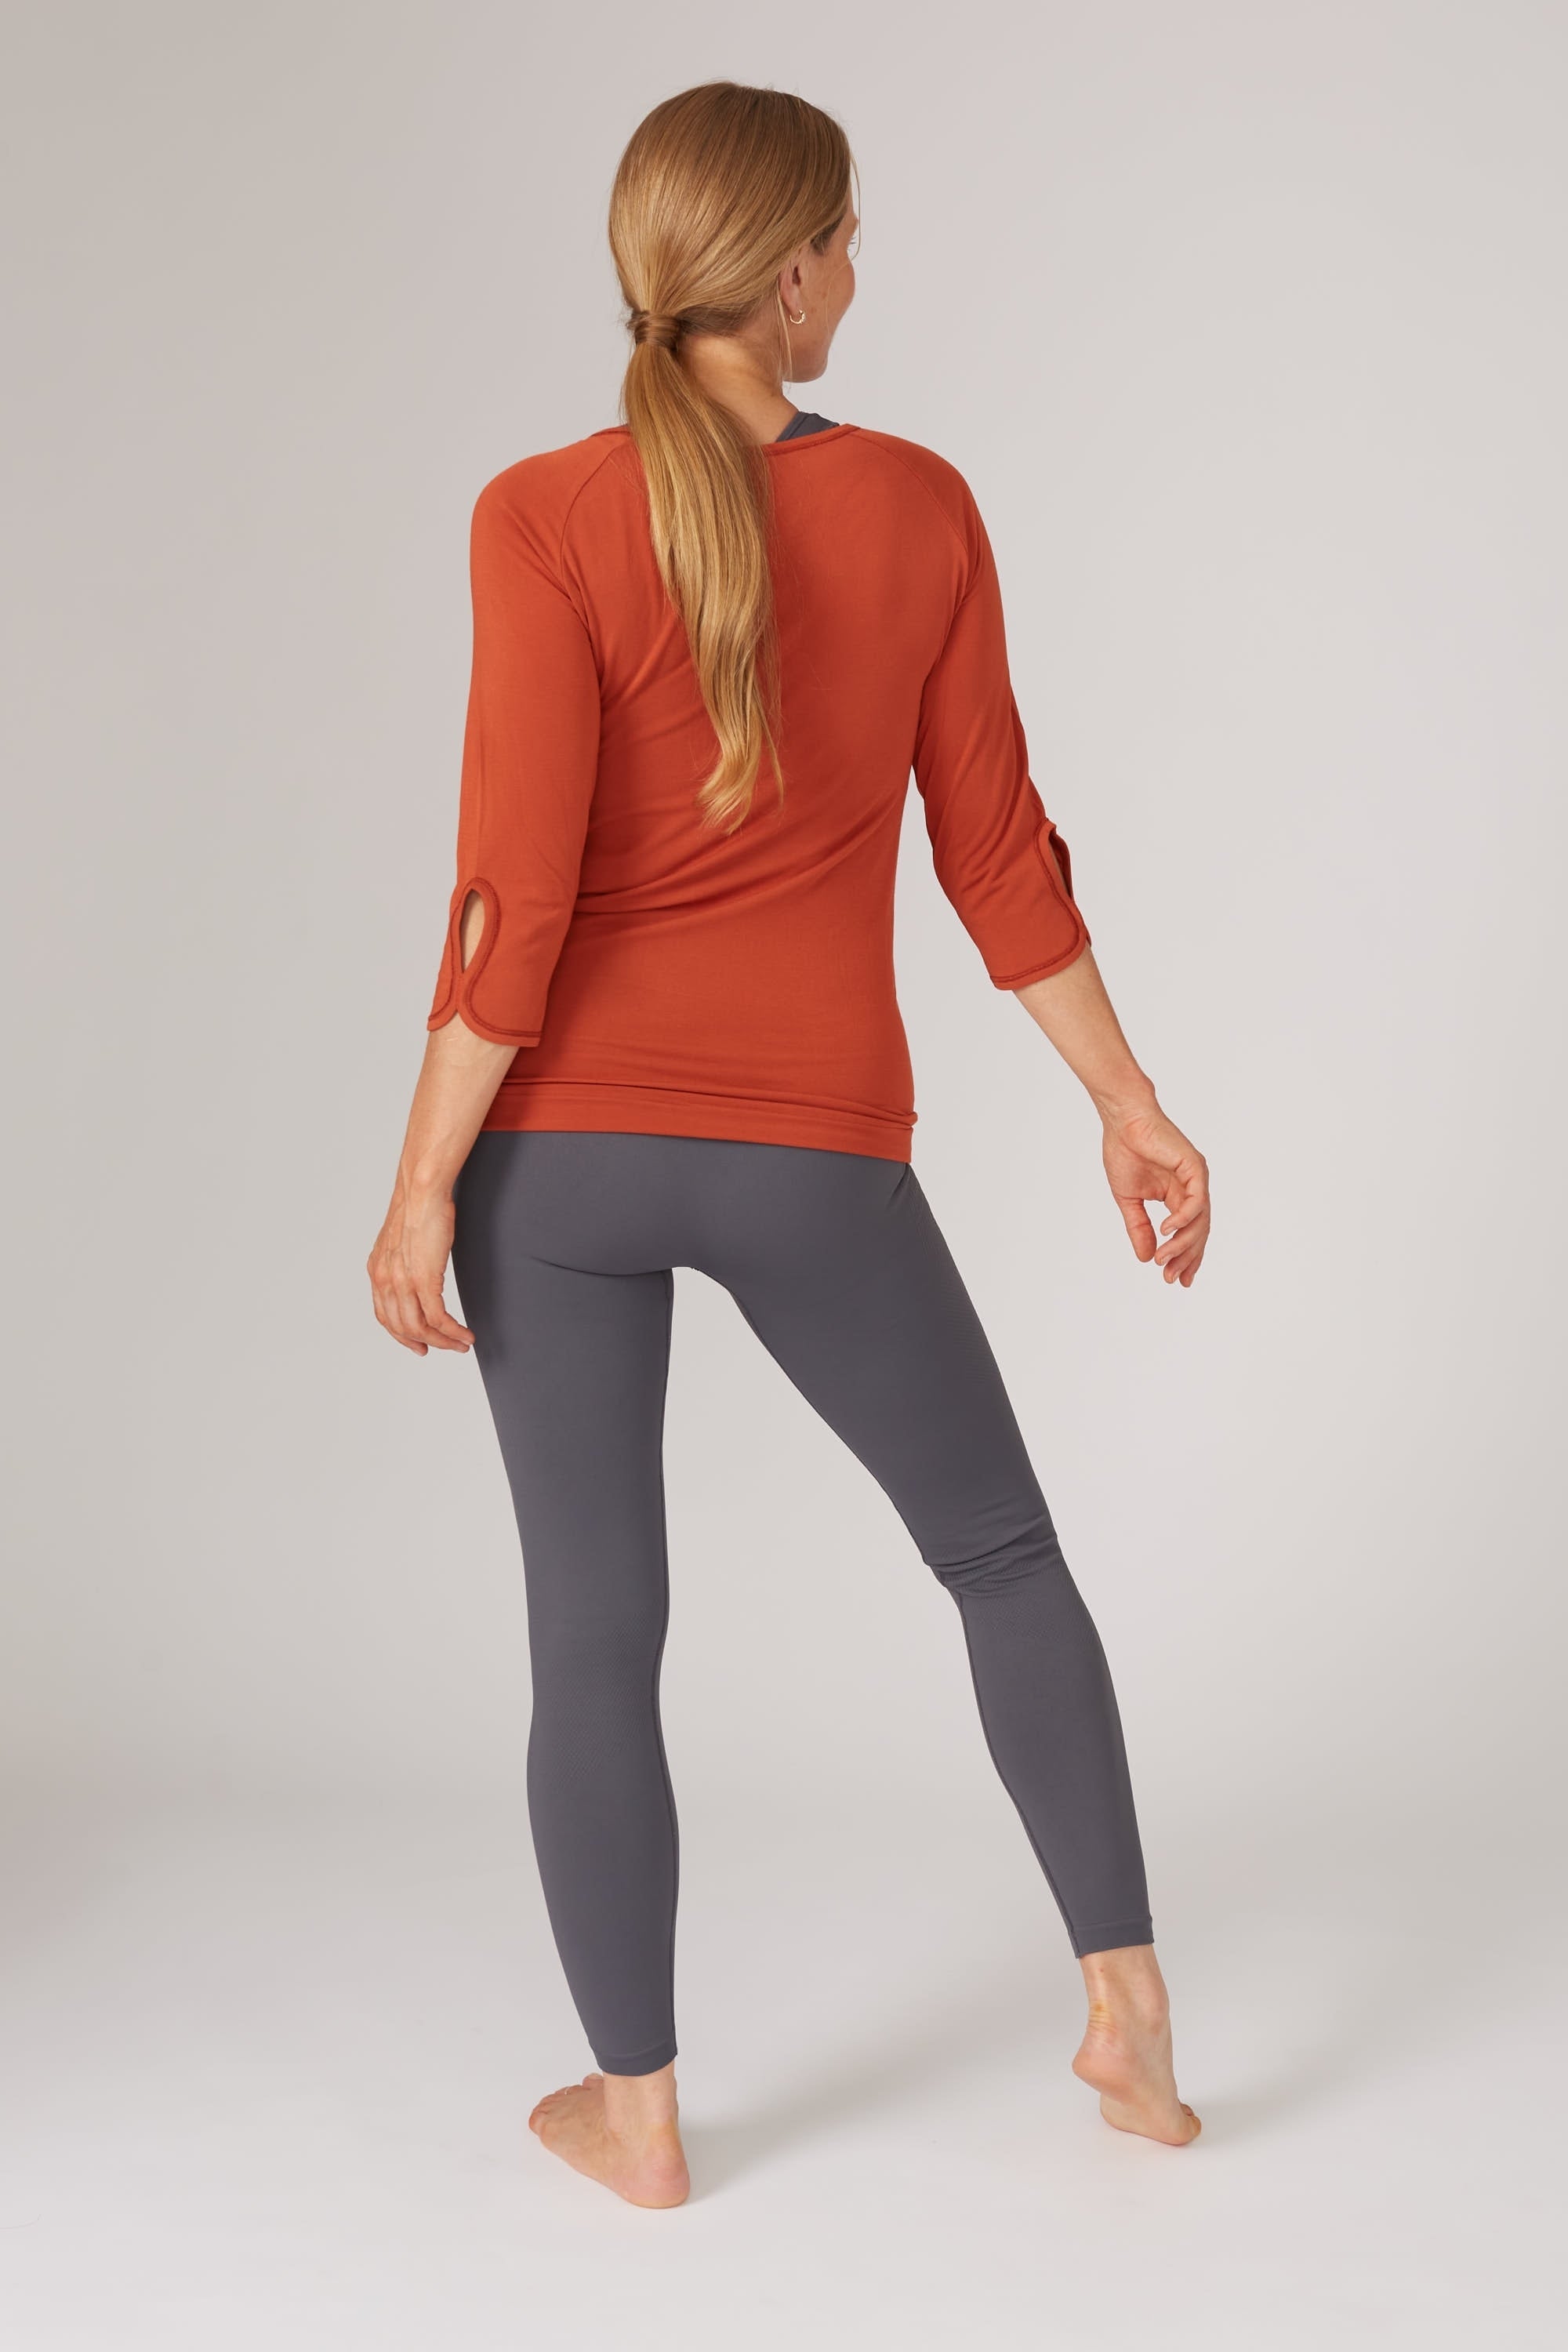 Bright burnt orange bamboo long sleeve top and dark grey leggings for yoga, pilates, barre and running from sustainable activewear brand, Jilla Active